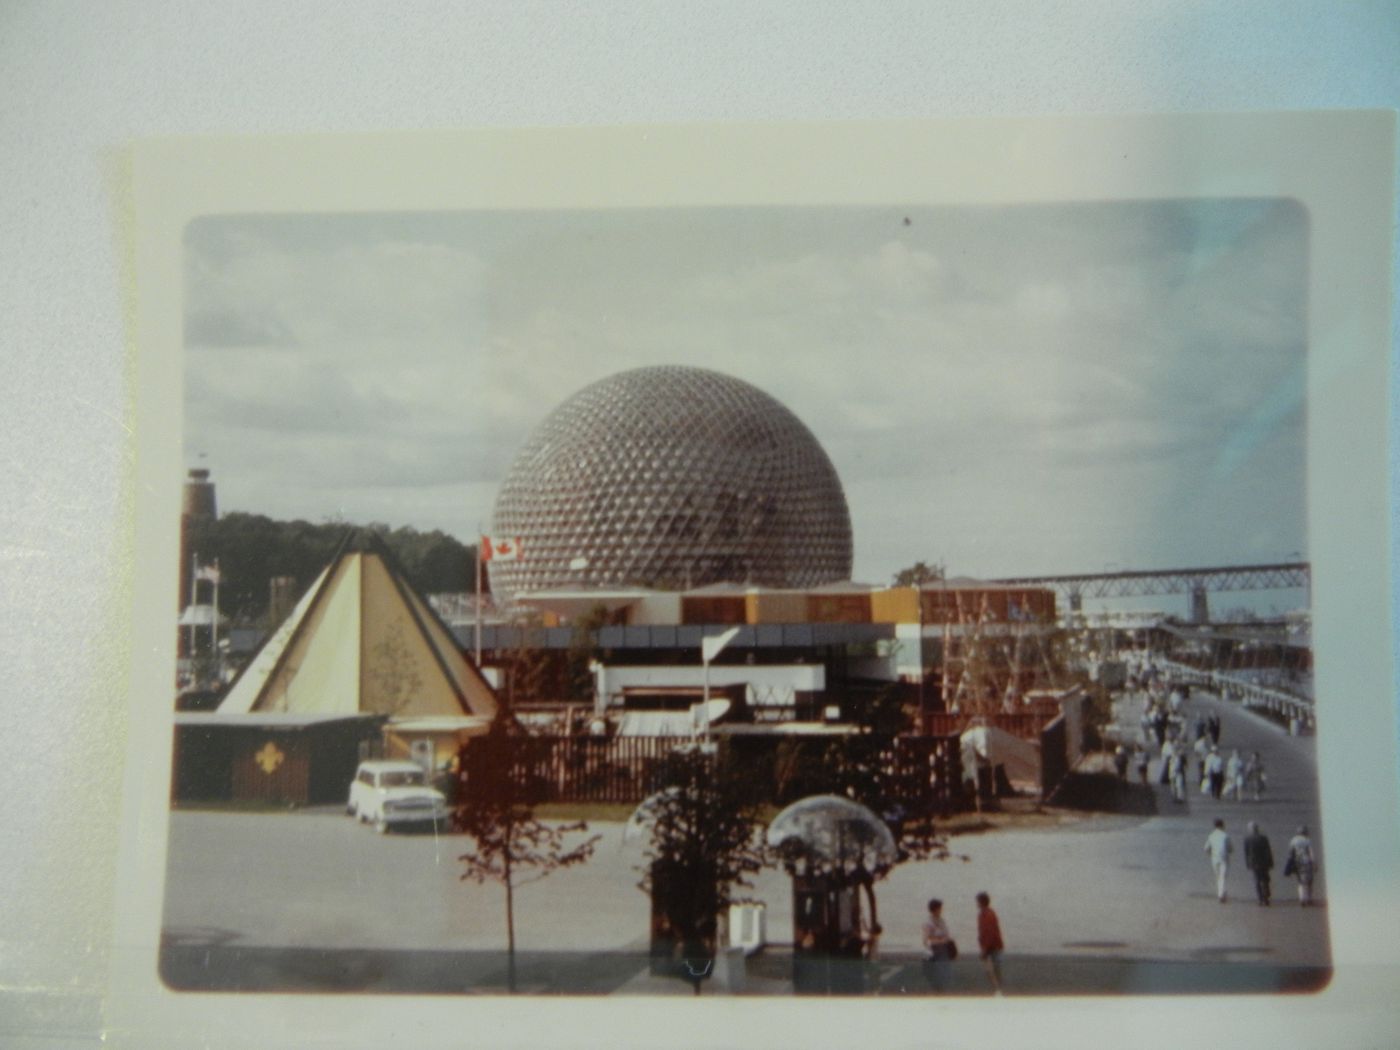 View of the International Scout Centre with the Pavilion of the United States in background, Expo 67, Montréal, Québec